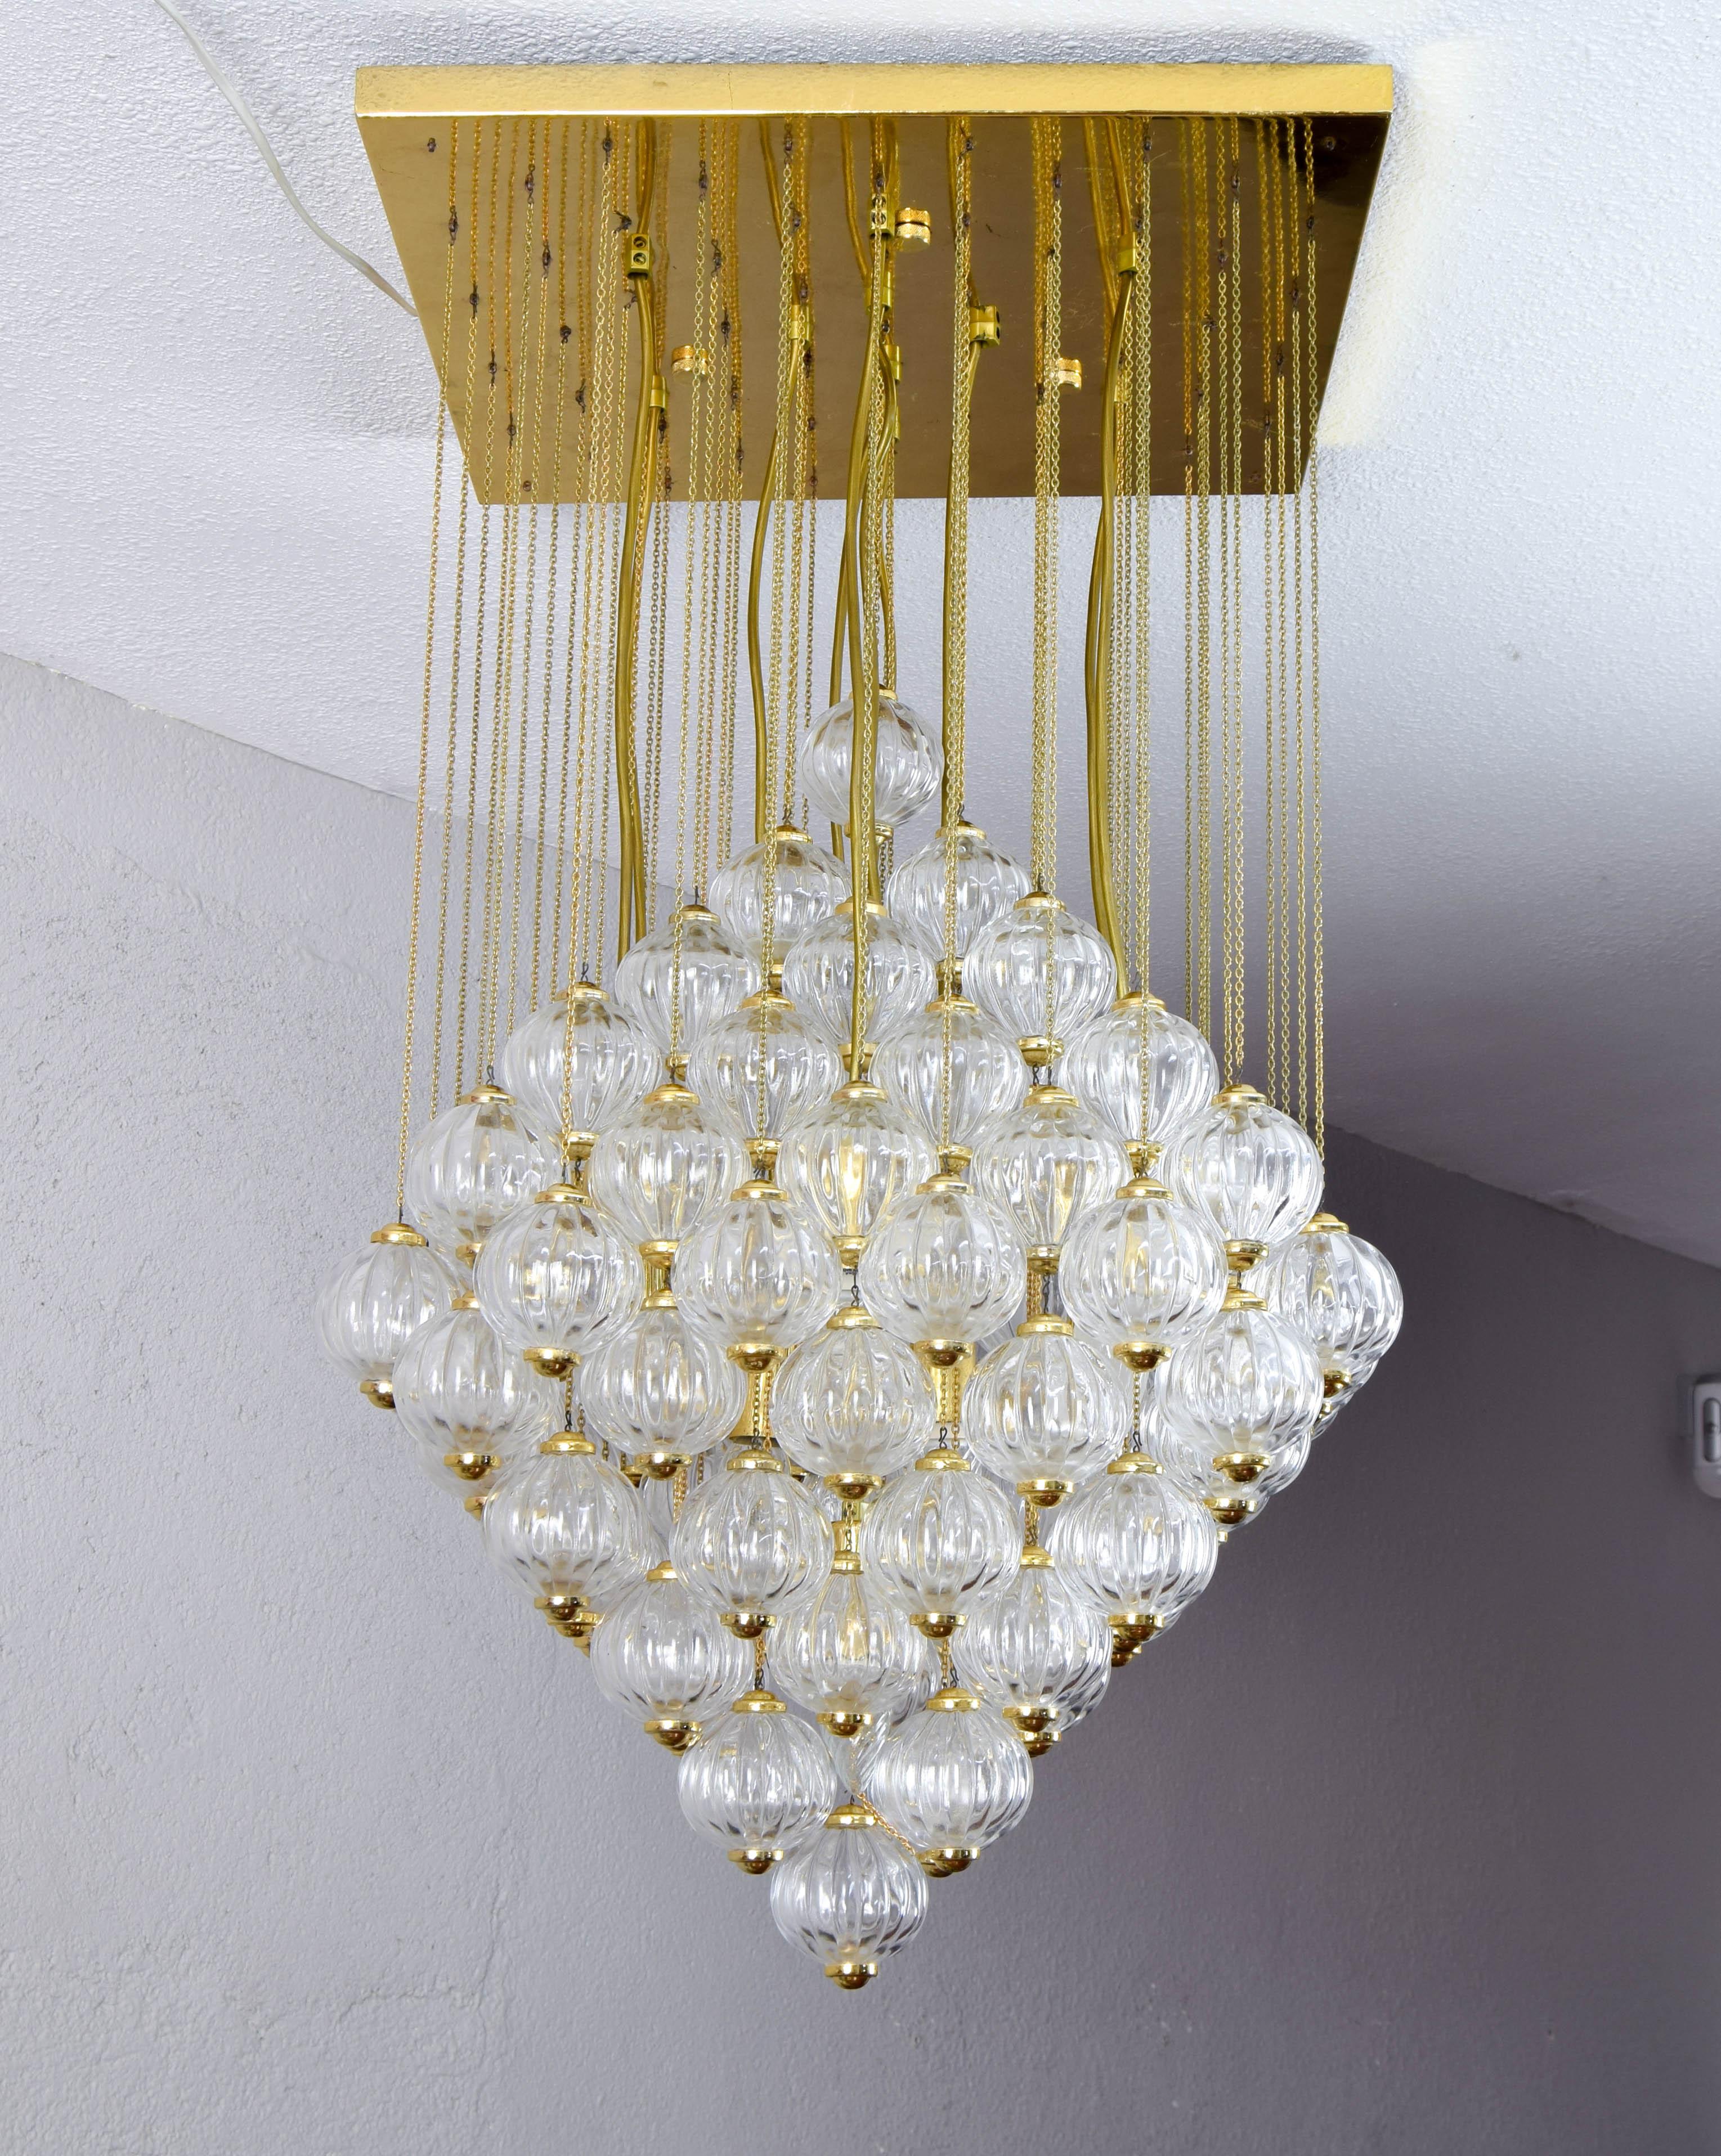 Luxurious and Spectacular Flushmount Murano Hand Blown Bubbles and Brass Chandelier designed and produced by Paolo Venini in 1960 in Italy.
With an exquisite design, it is a multitude of carved Murano glass balls measuring 7 centimeters in